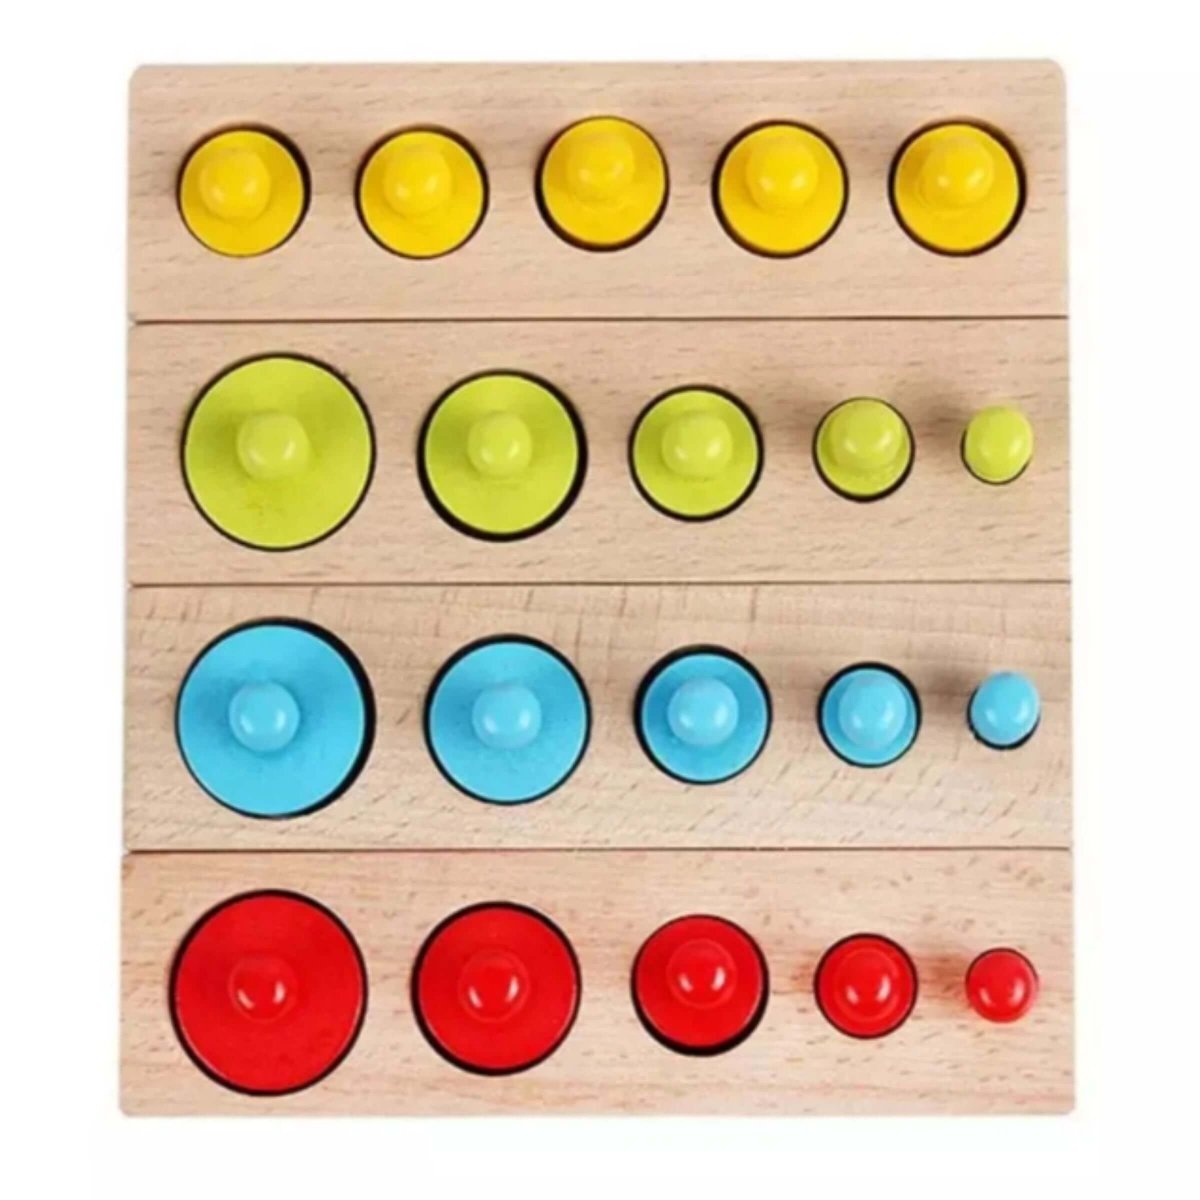 Educational Baby Stacking Blocks Wooden Montessori Cylinders Best Sensory Toddler Toy Learning Gifts for Girls Boys Rainbow